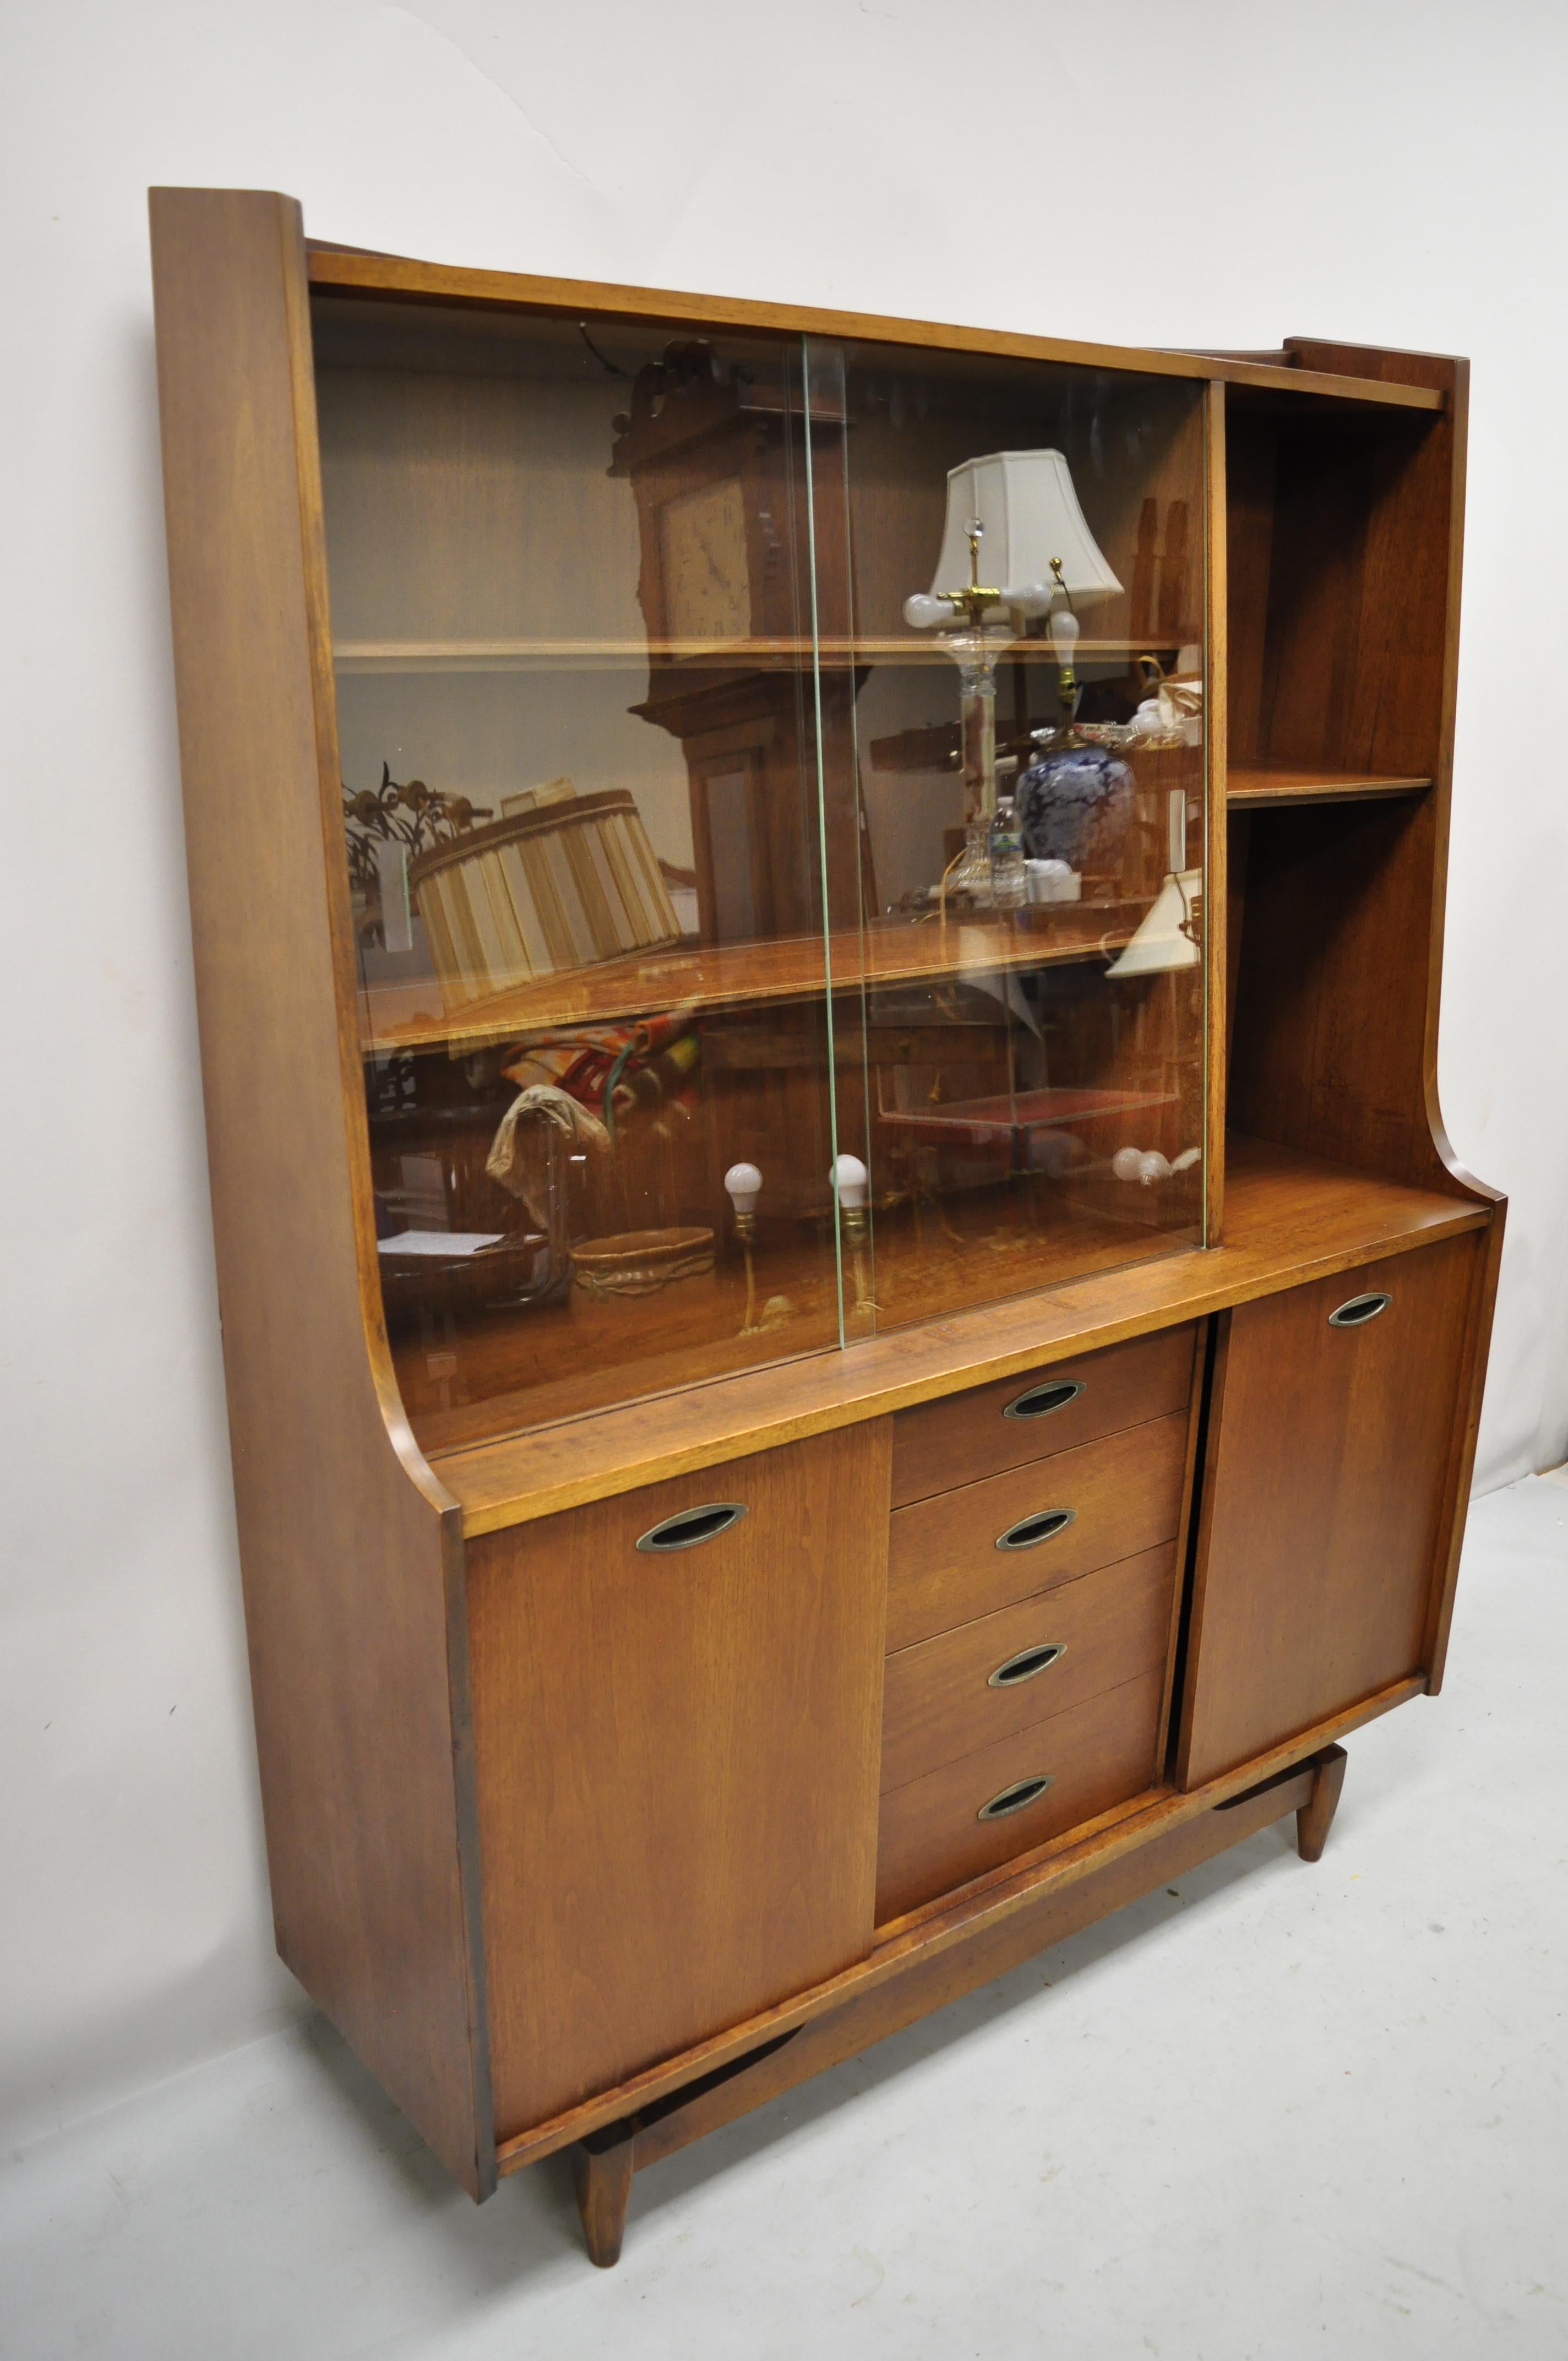 Vintage Mid Century Modern Walnut Bassett China Cabinet Hutch Display with Sliding Glass Doors. Item features 2 sliding glass doors, 2 lower sliding wooden doors, 3 dovetailed drawers, tapered legs, quality American craftsmanship, great style and